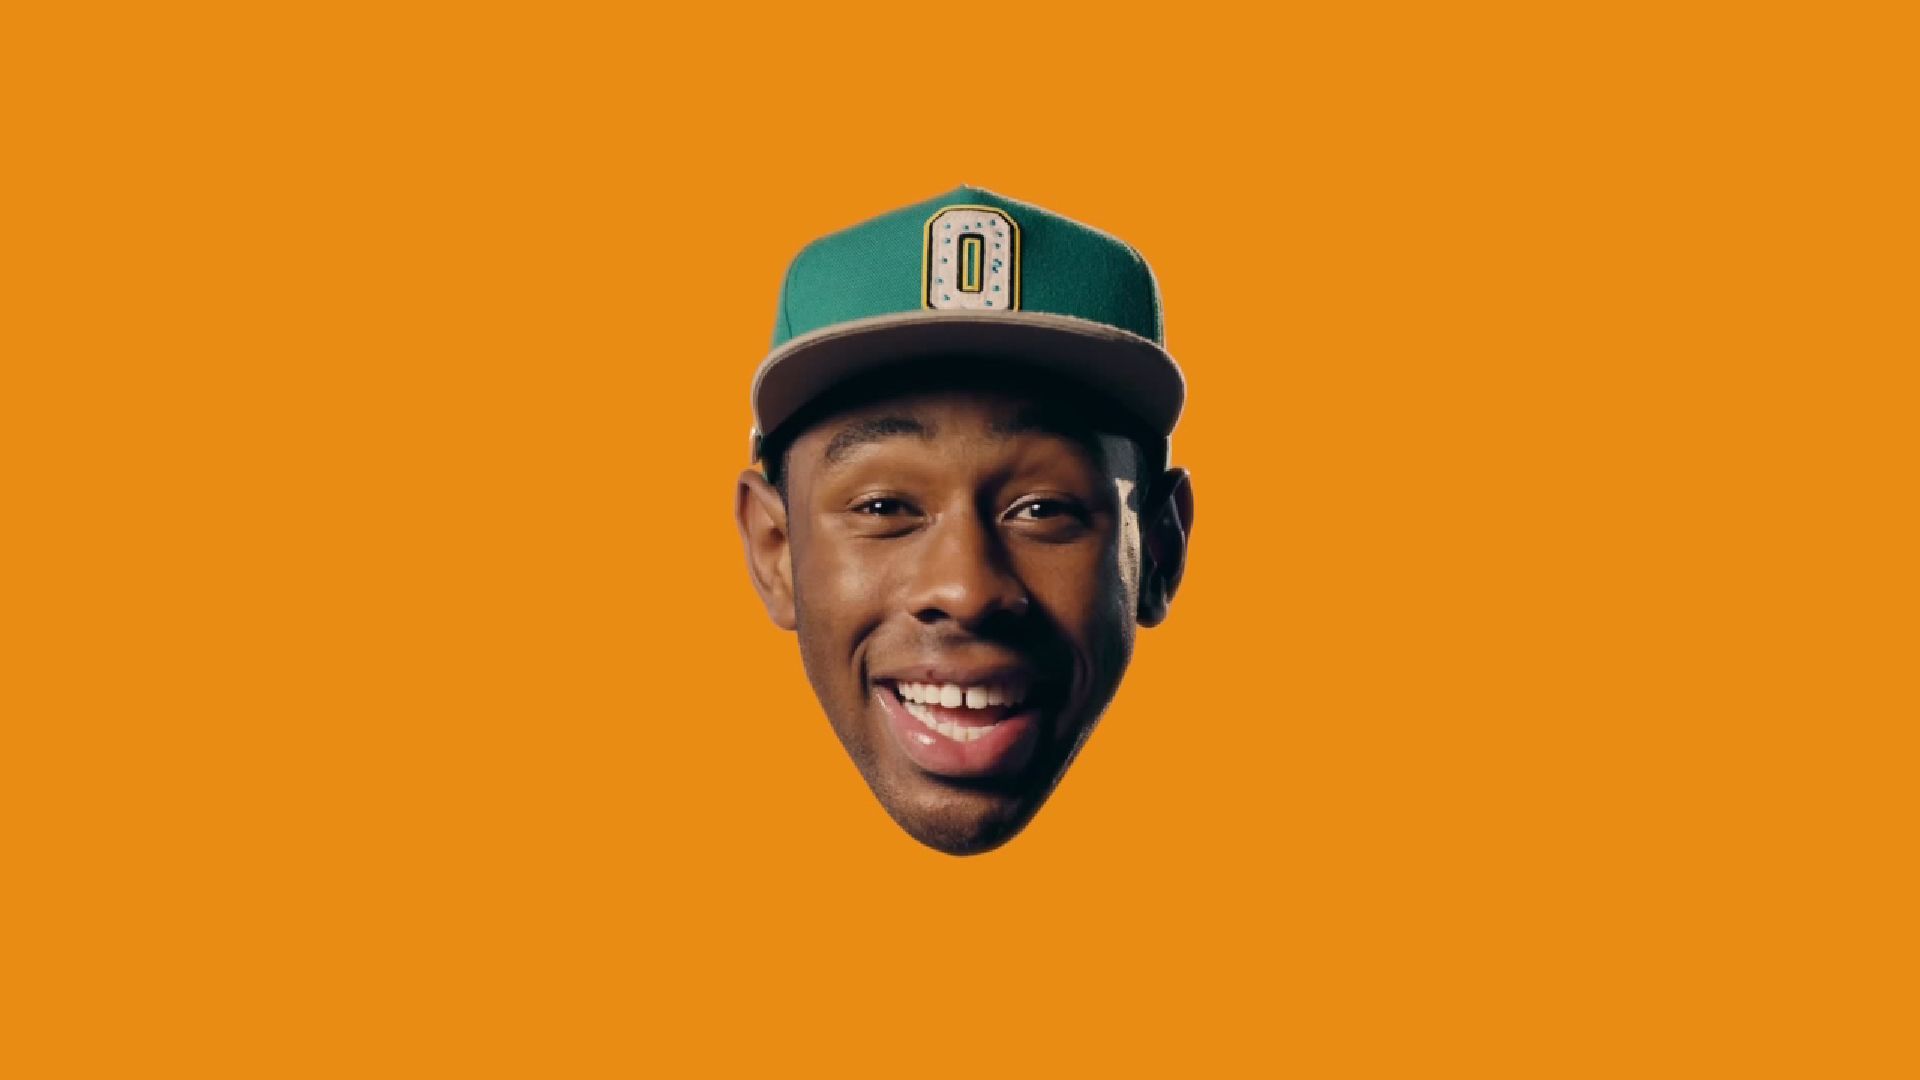 Aesthetic Tyler The Creator Wallpapers - Wallpaper Cave